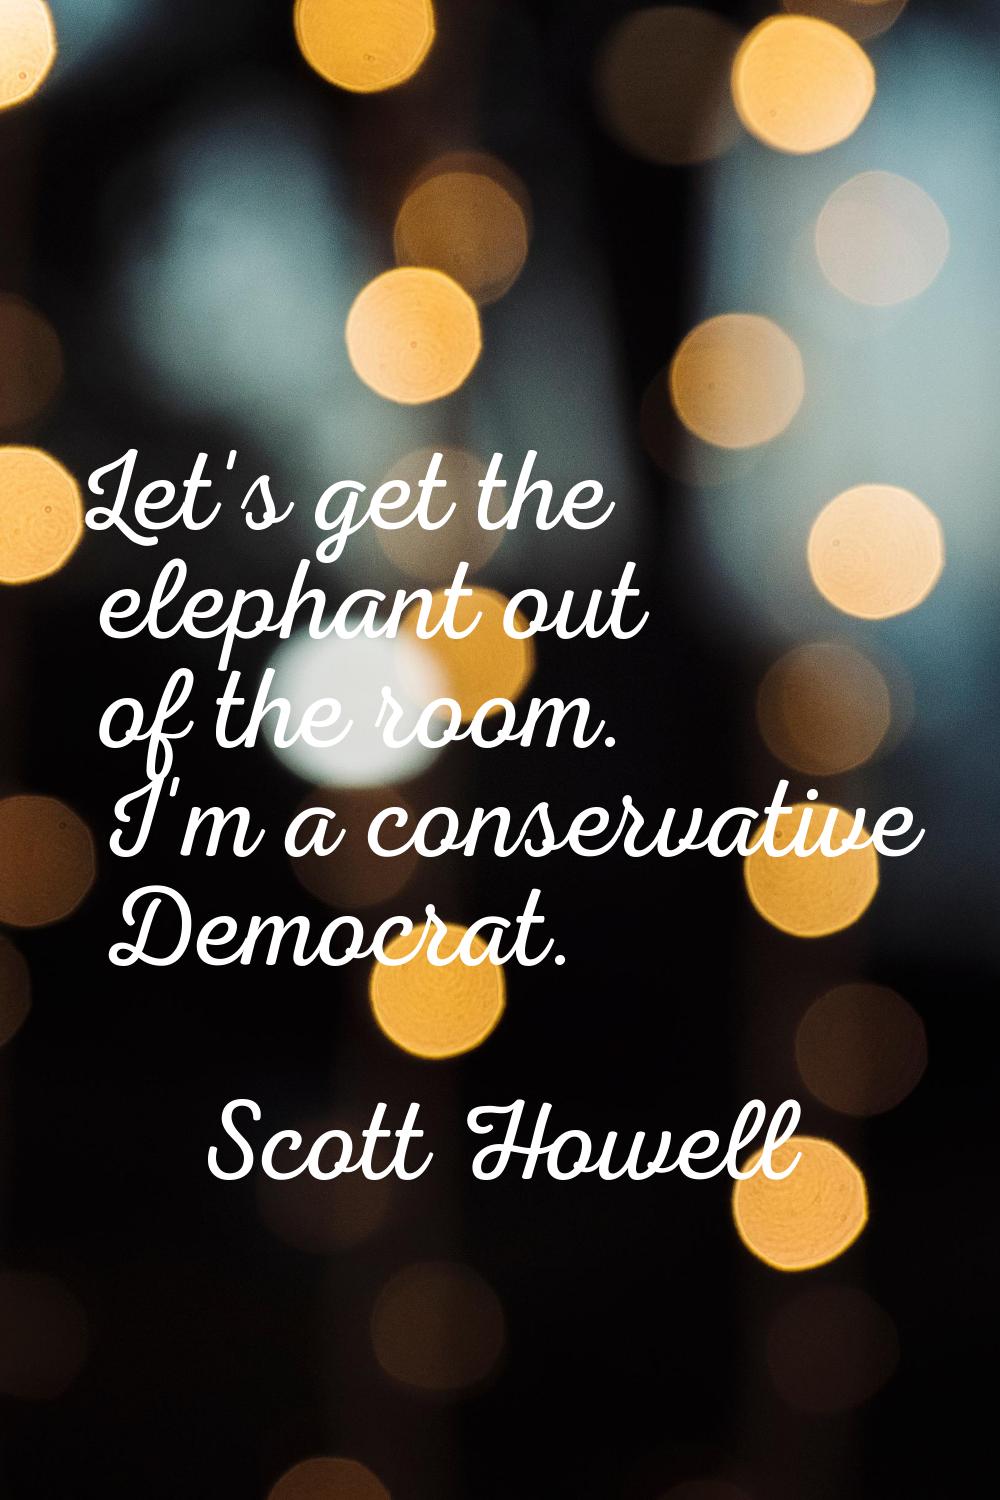 Let's get the elephant out of the room. I'm a conservative Democrat.